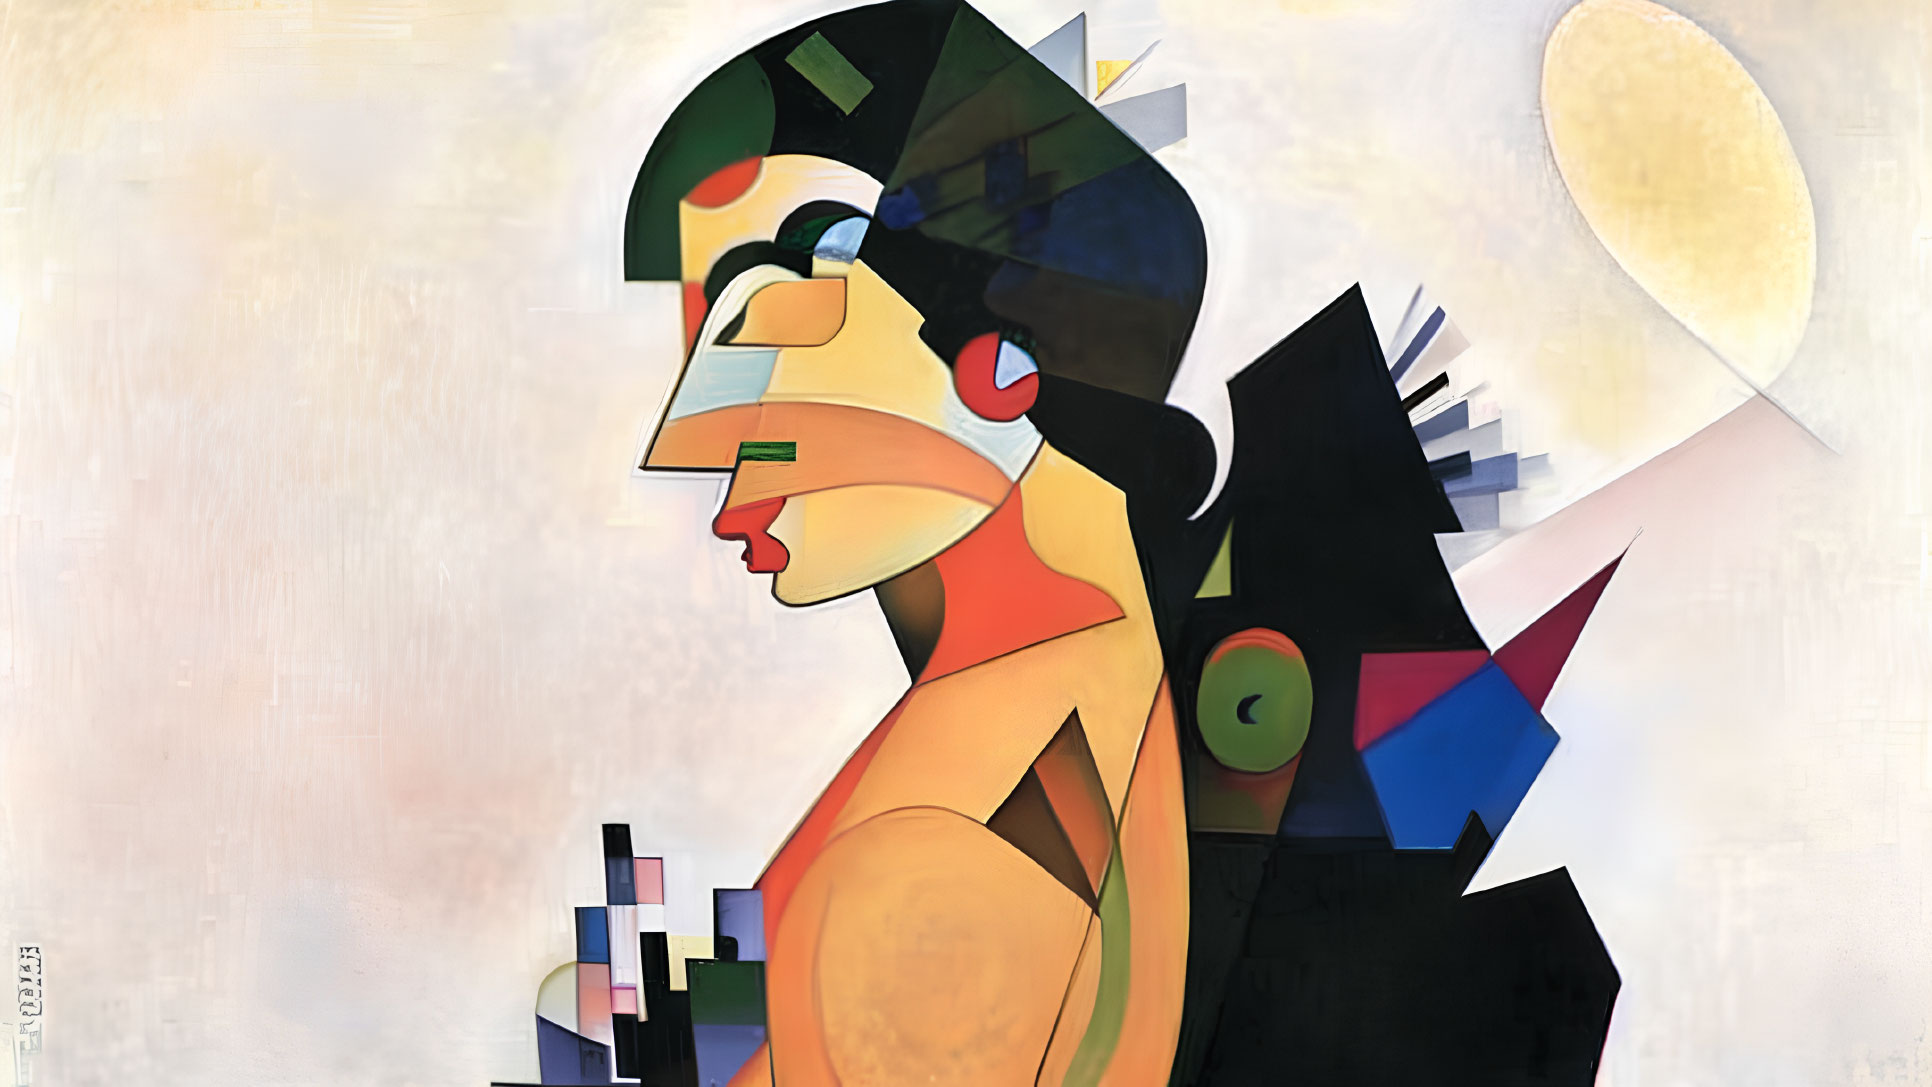 Vibrant Cubist Profile Painting with Geometric Shapes